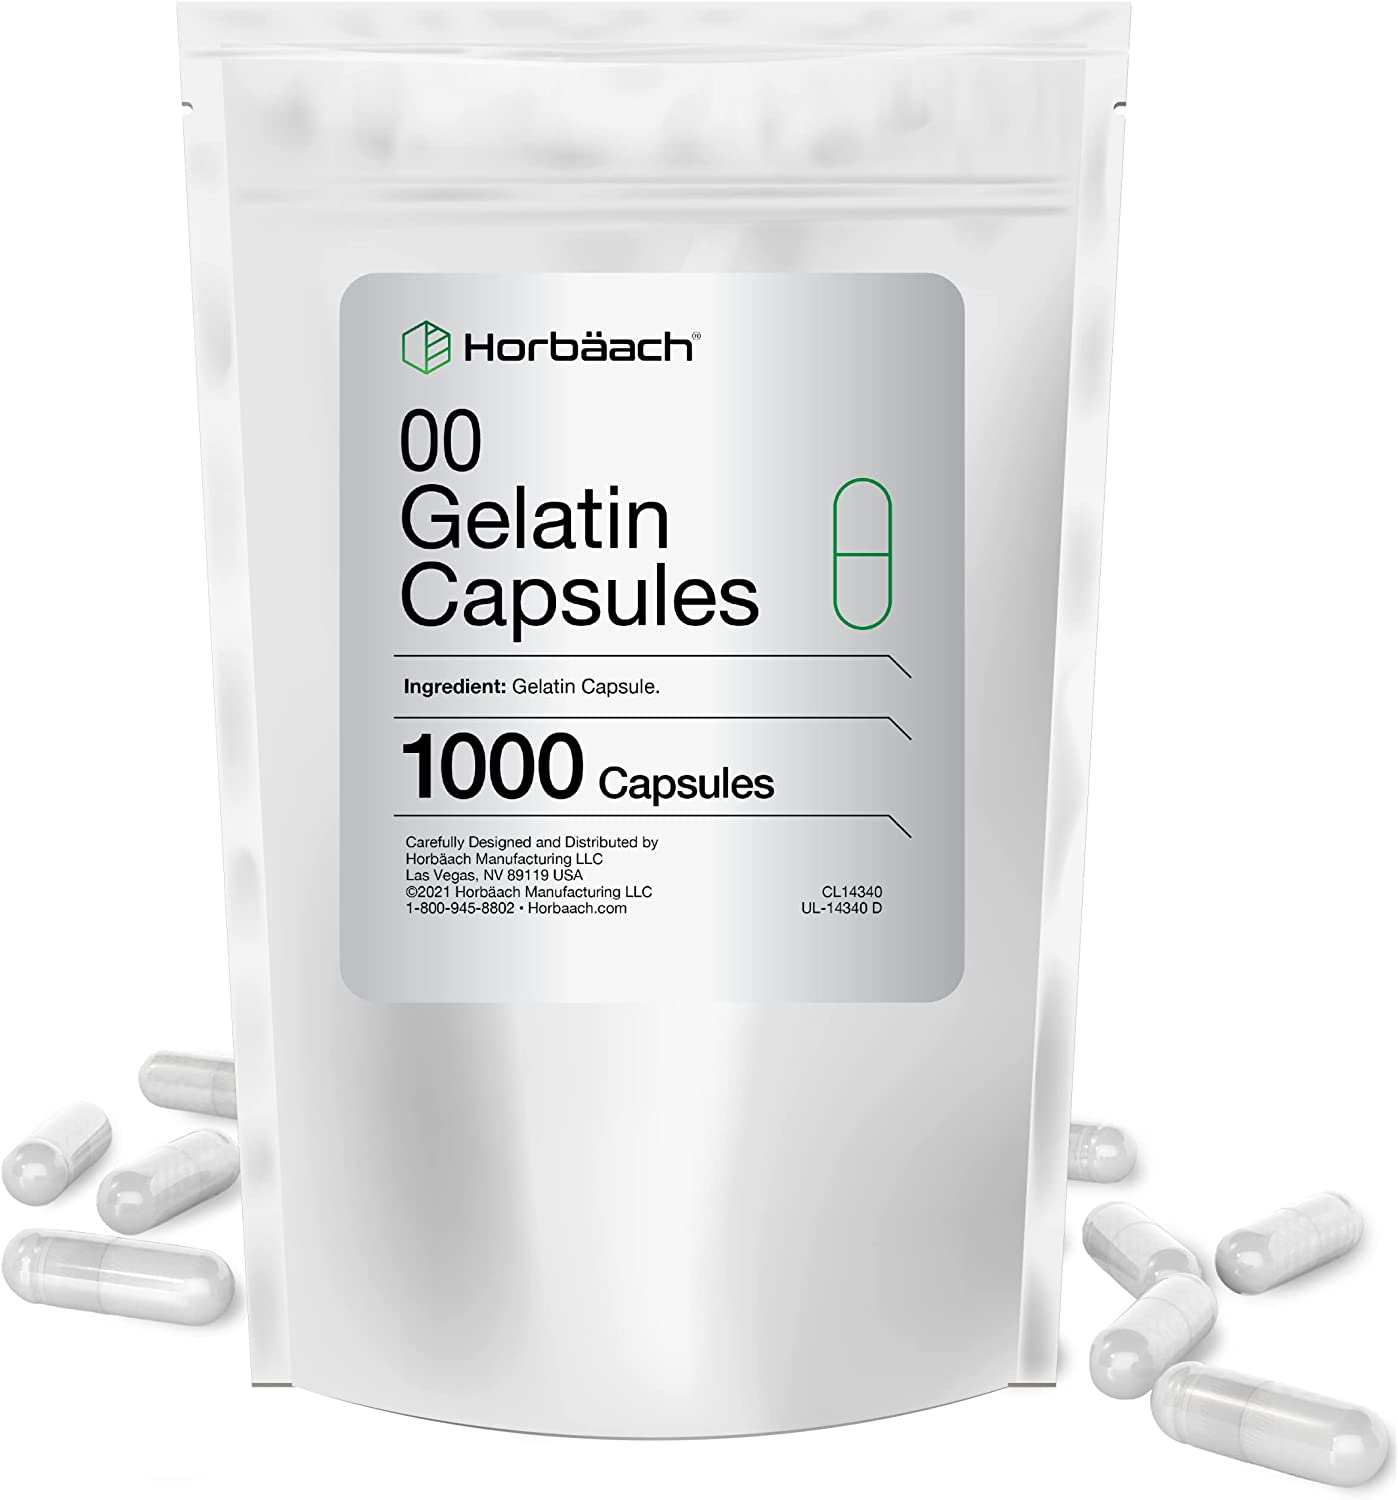 Clear Size 00 Empty Capsules,1000 Gelatin Capsules by Horbaach